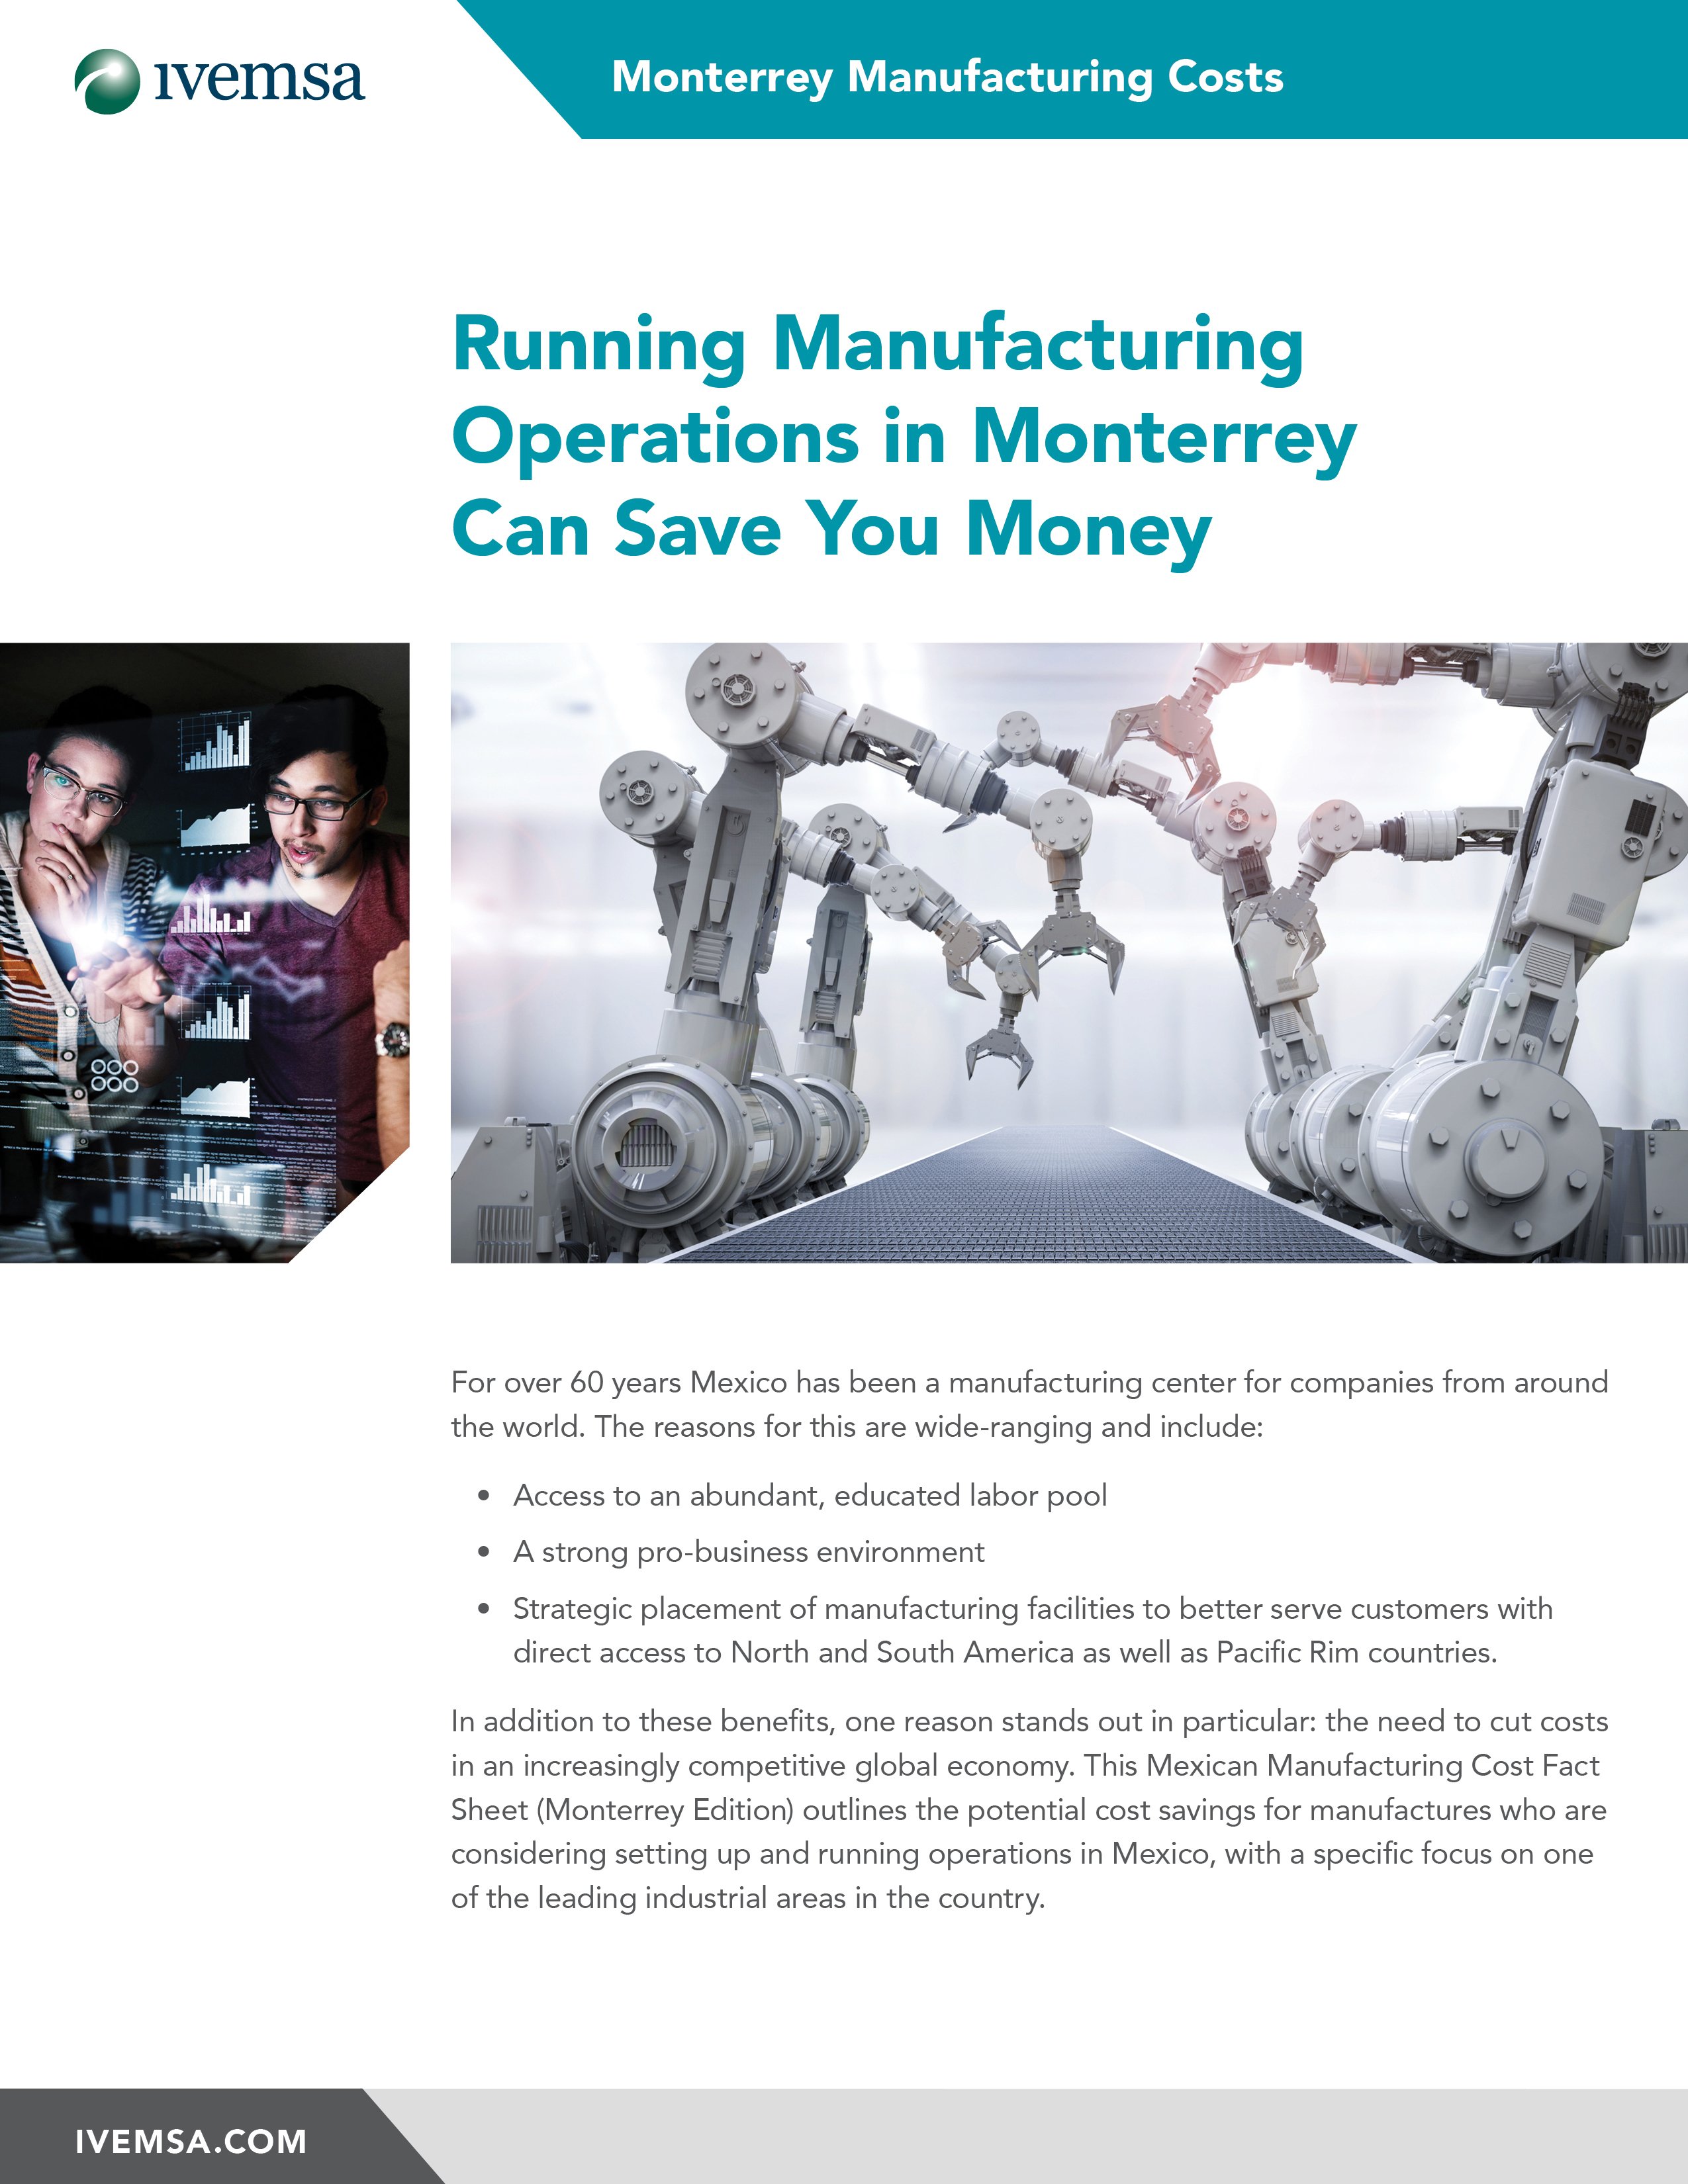 IVEMSA_Guide-MXManufacturingCosts_Monterrey Cover